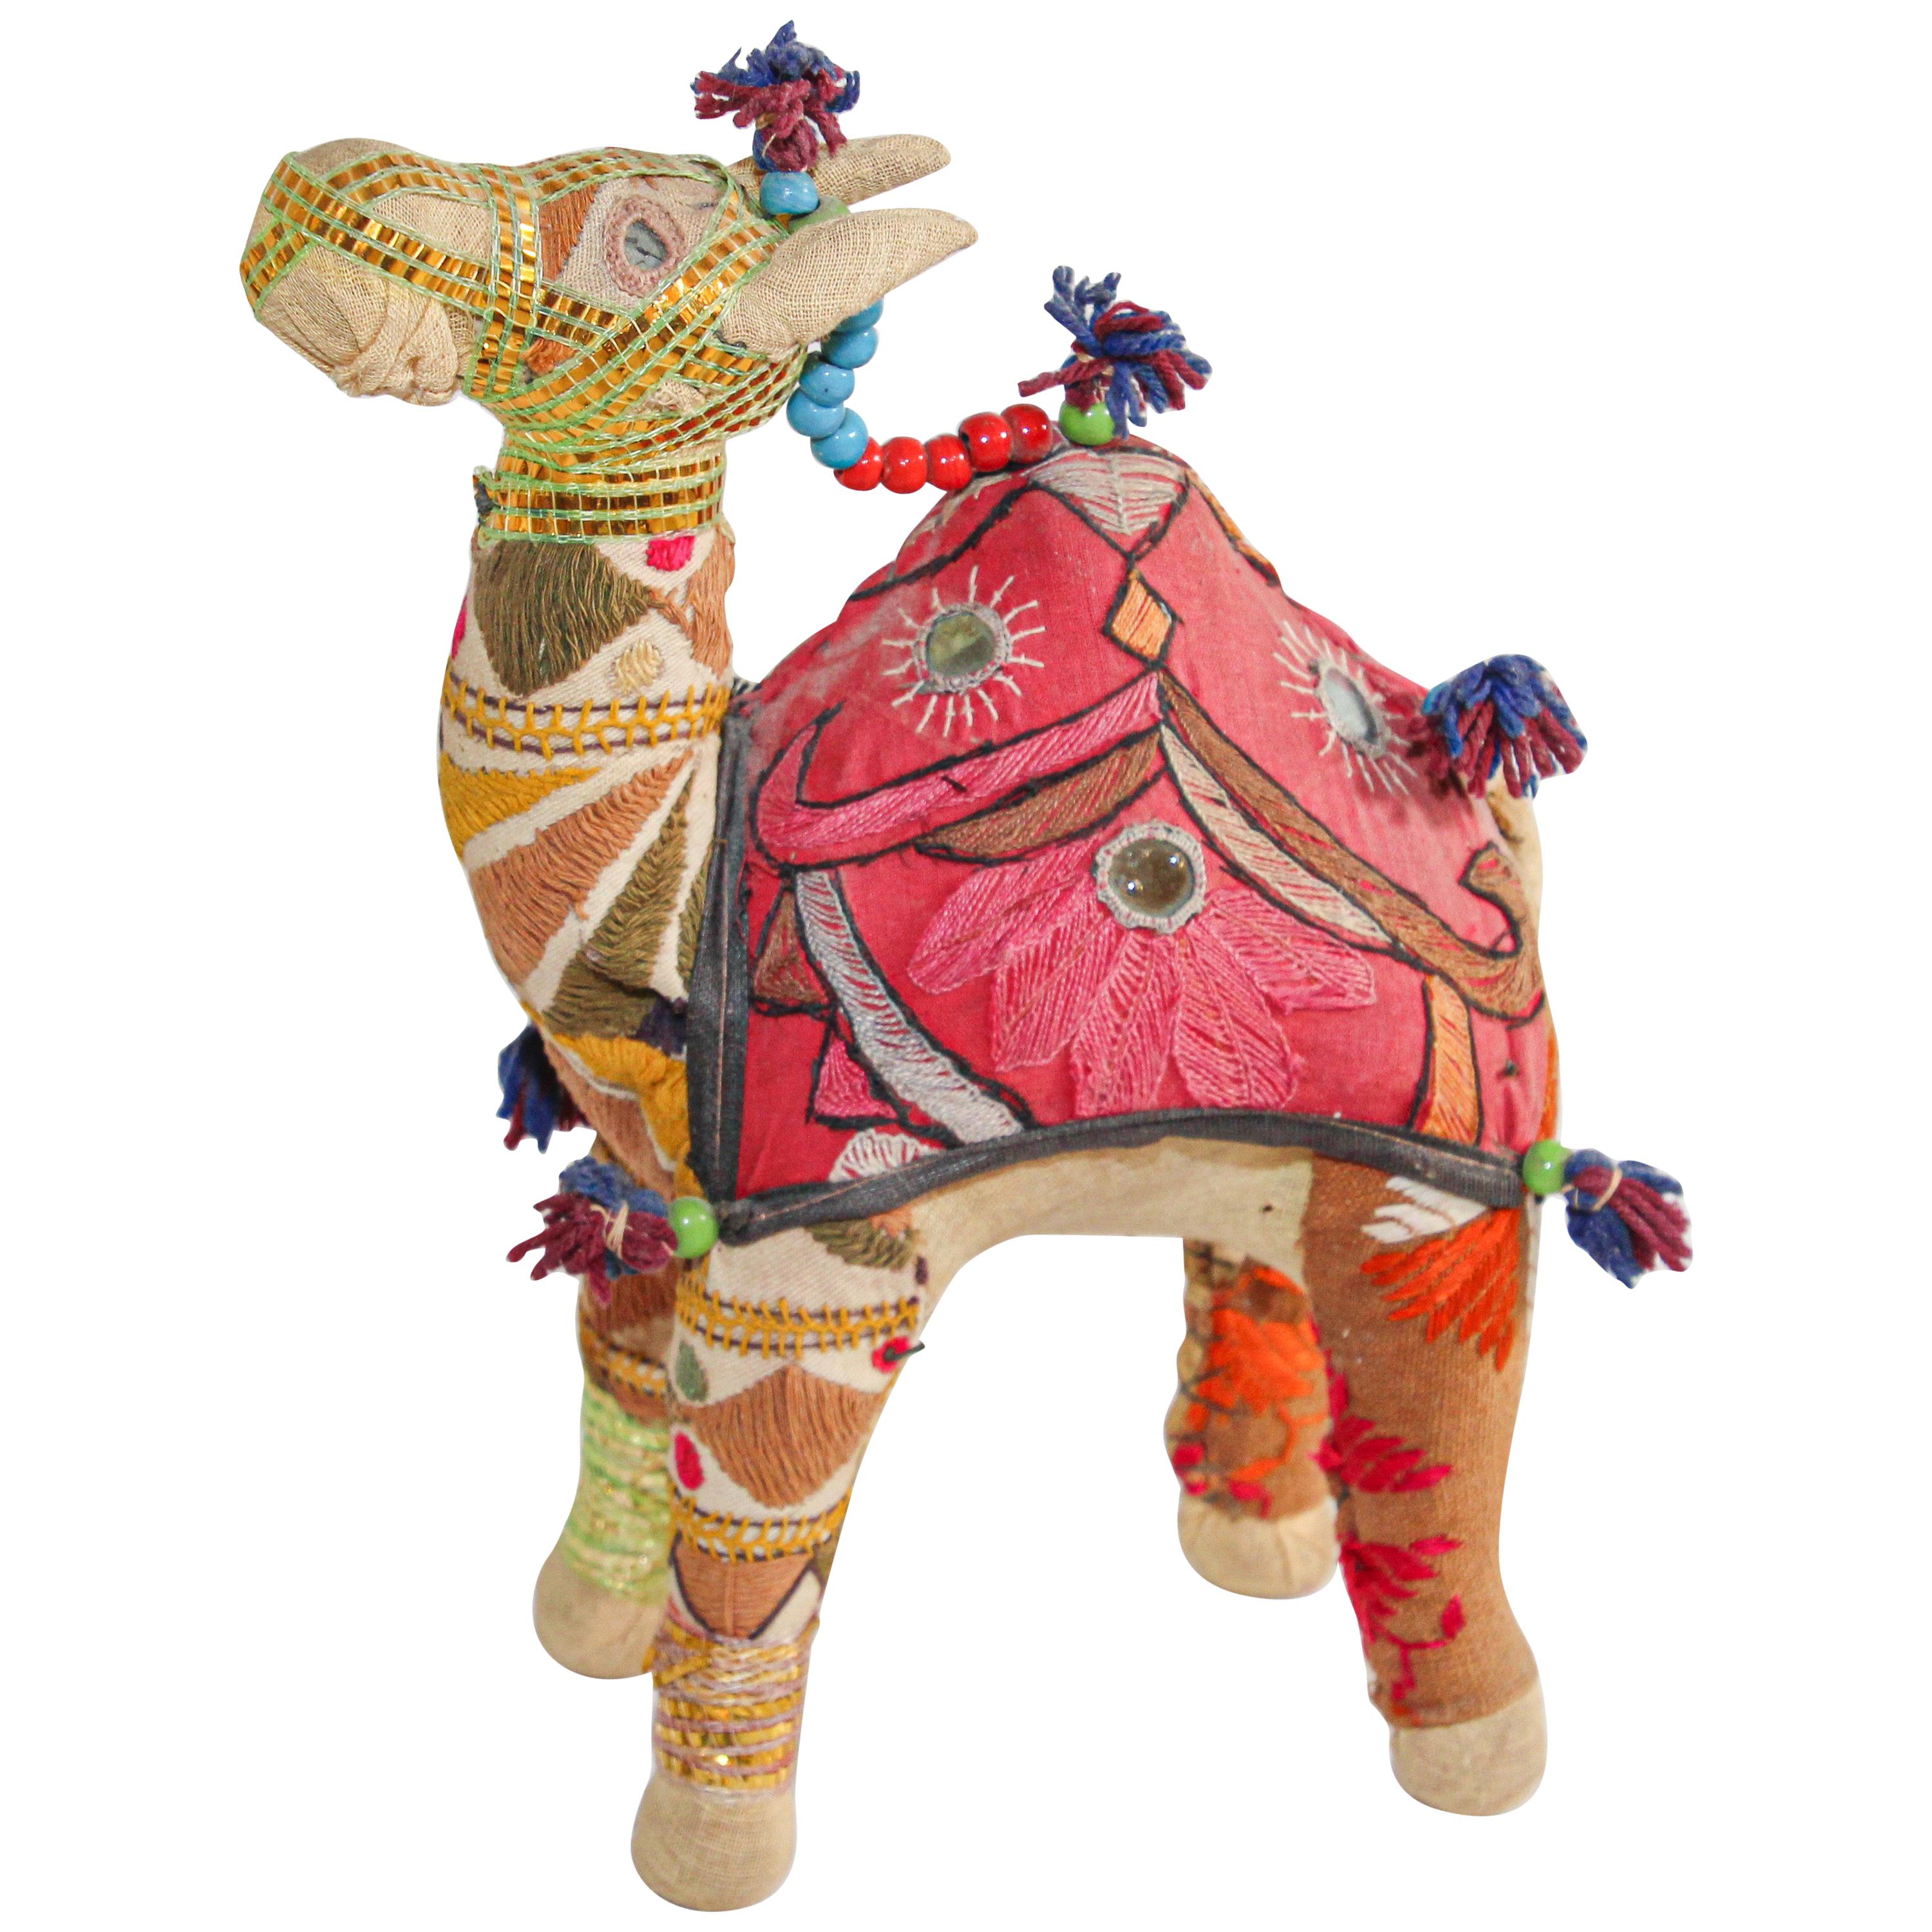 Handcrafted Vintage Stuffed Cotton Embroidered Camel Toy, India, 1950